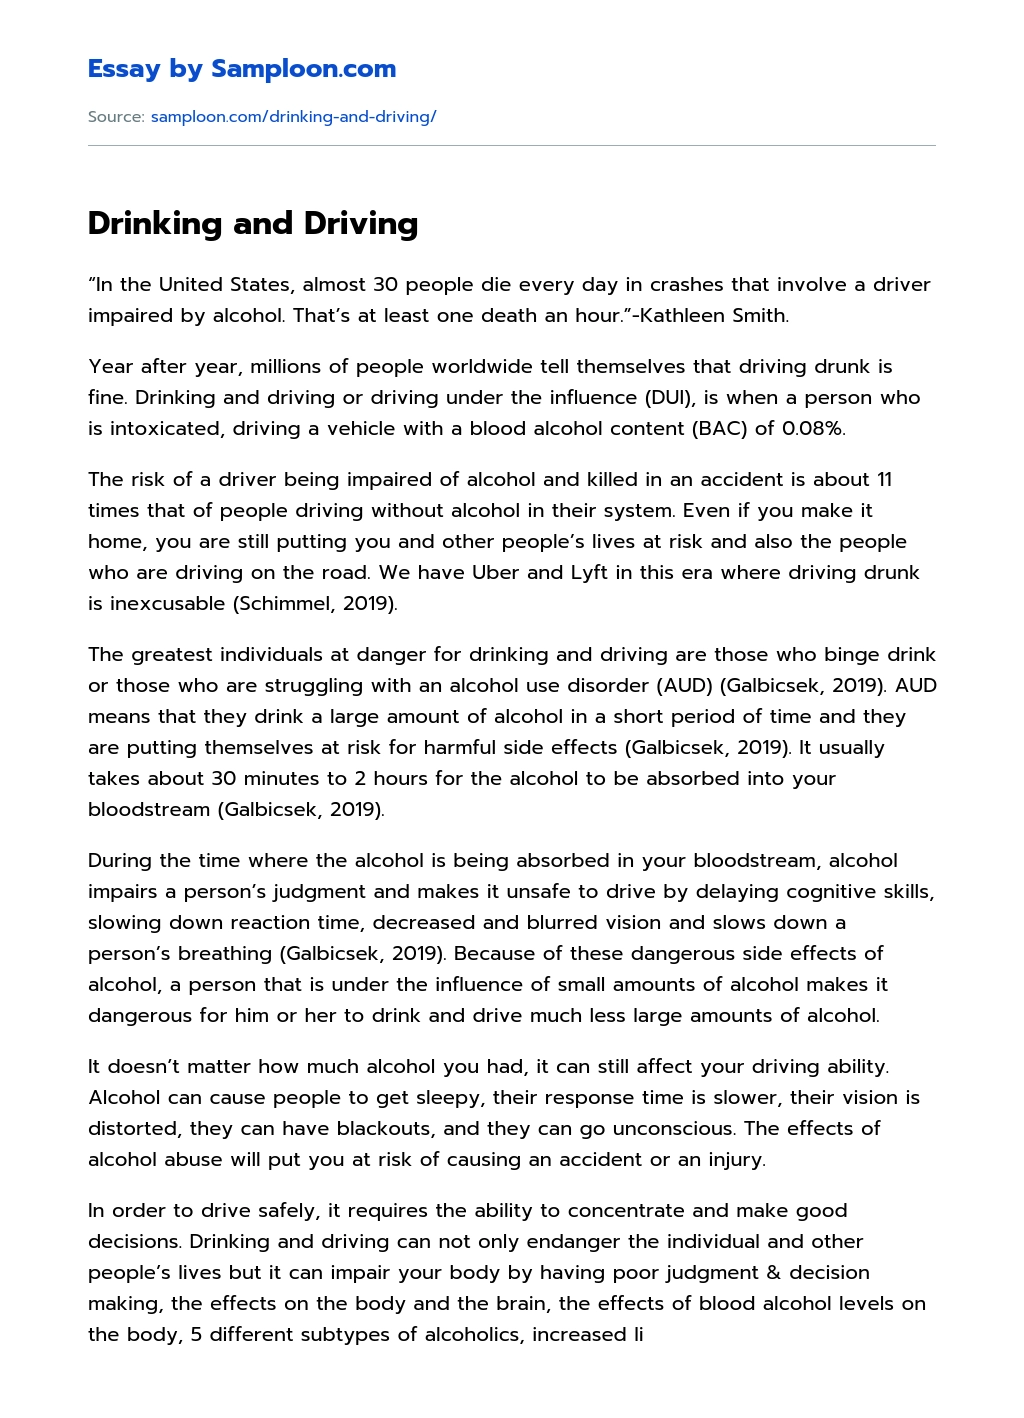 Drinking and Driving essay